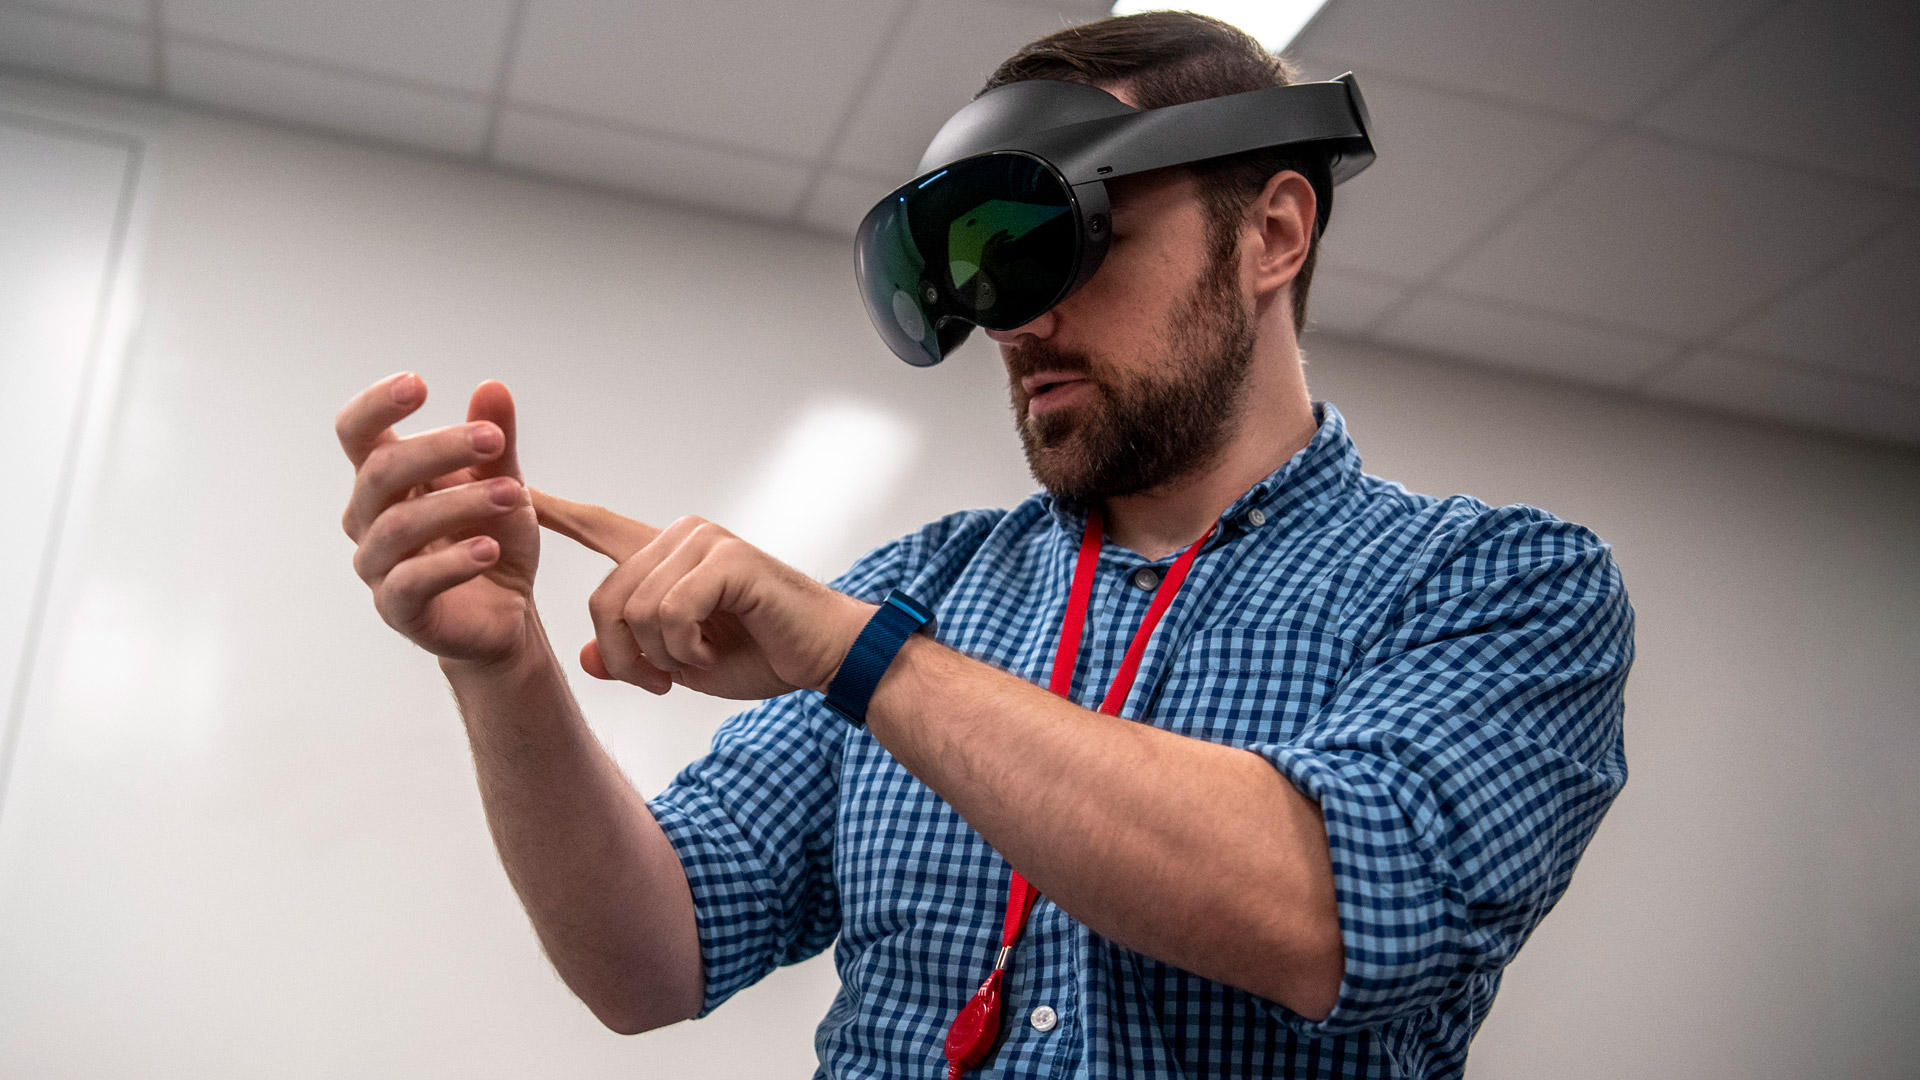 Meta Quest Pro: Mixed Reality Enters Enterprise Learning